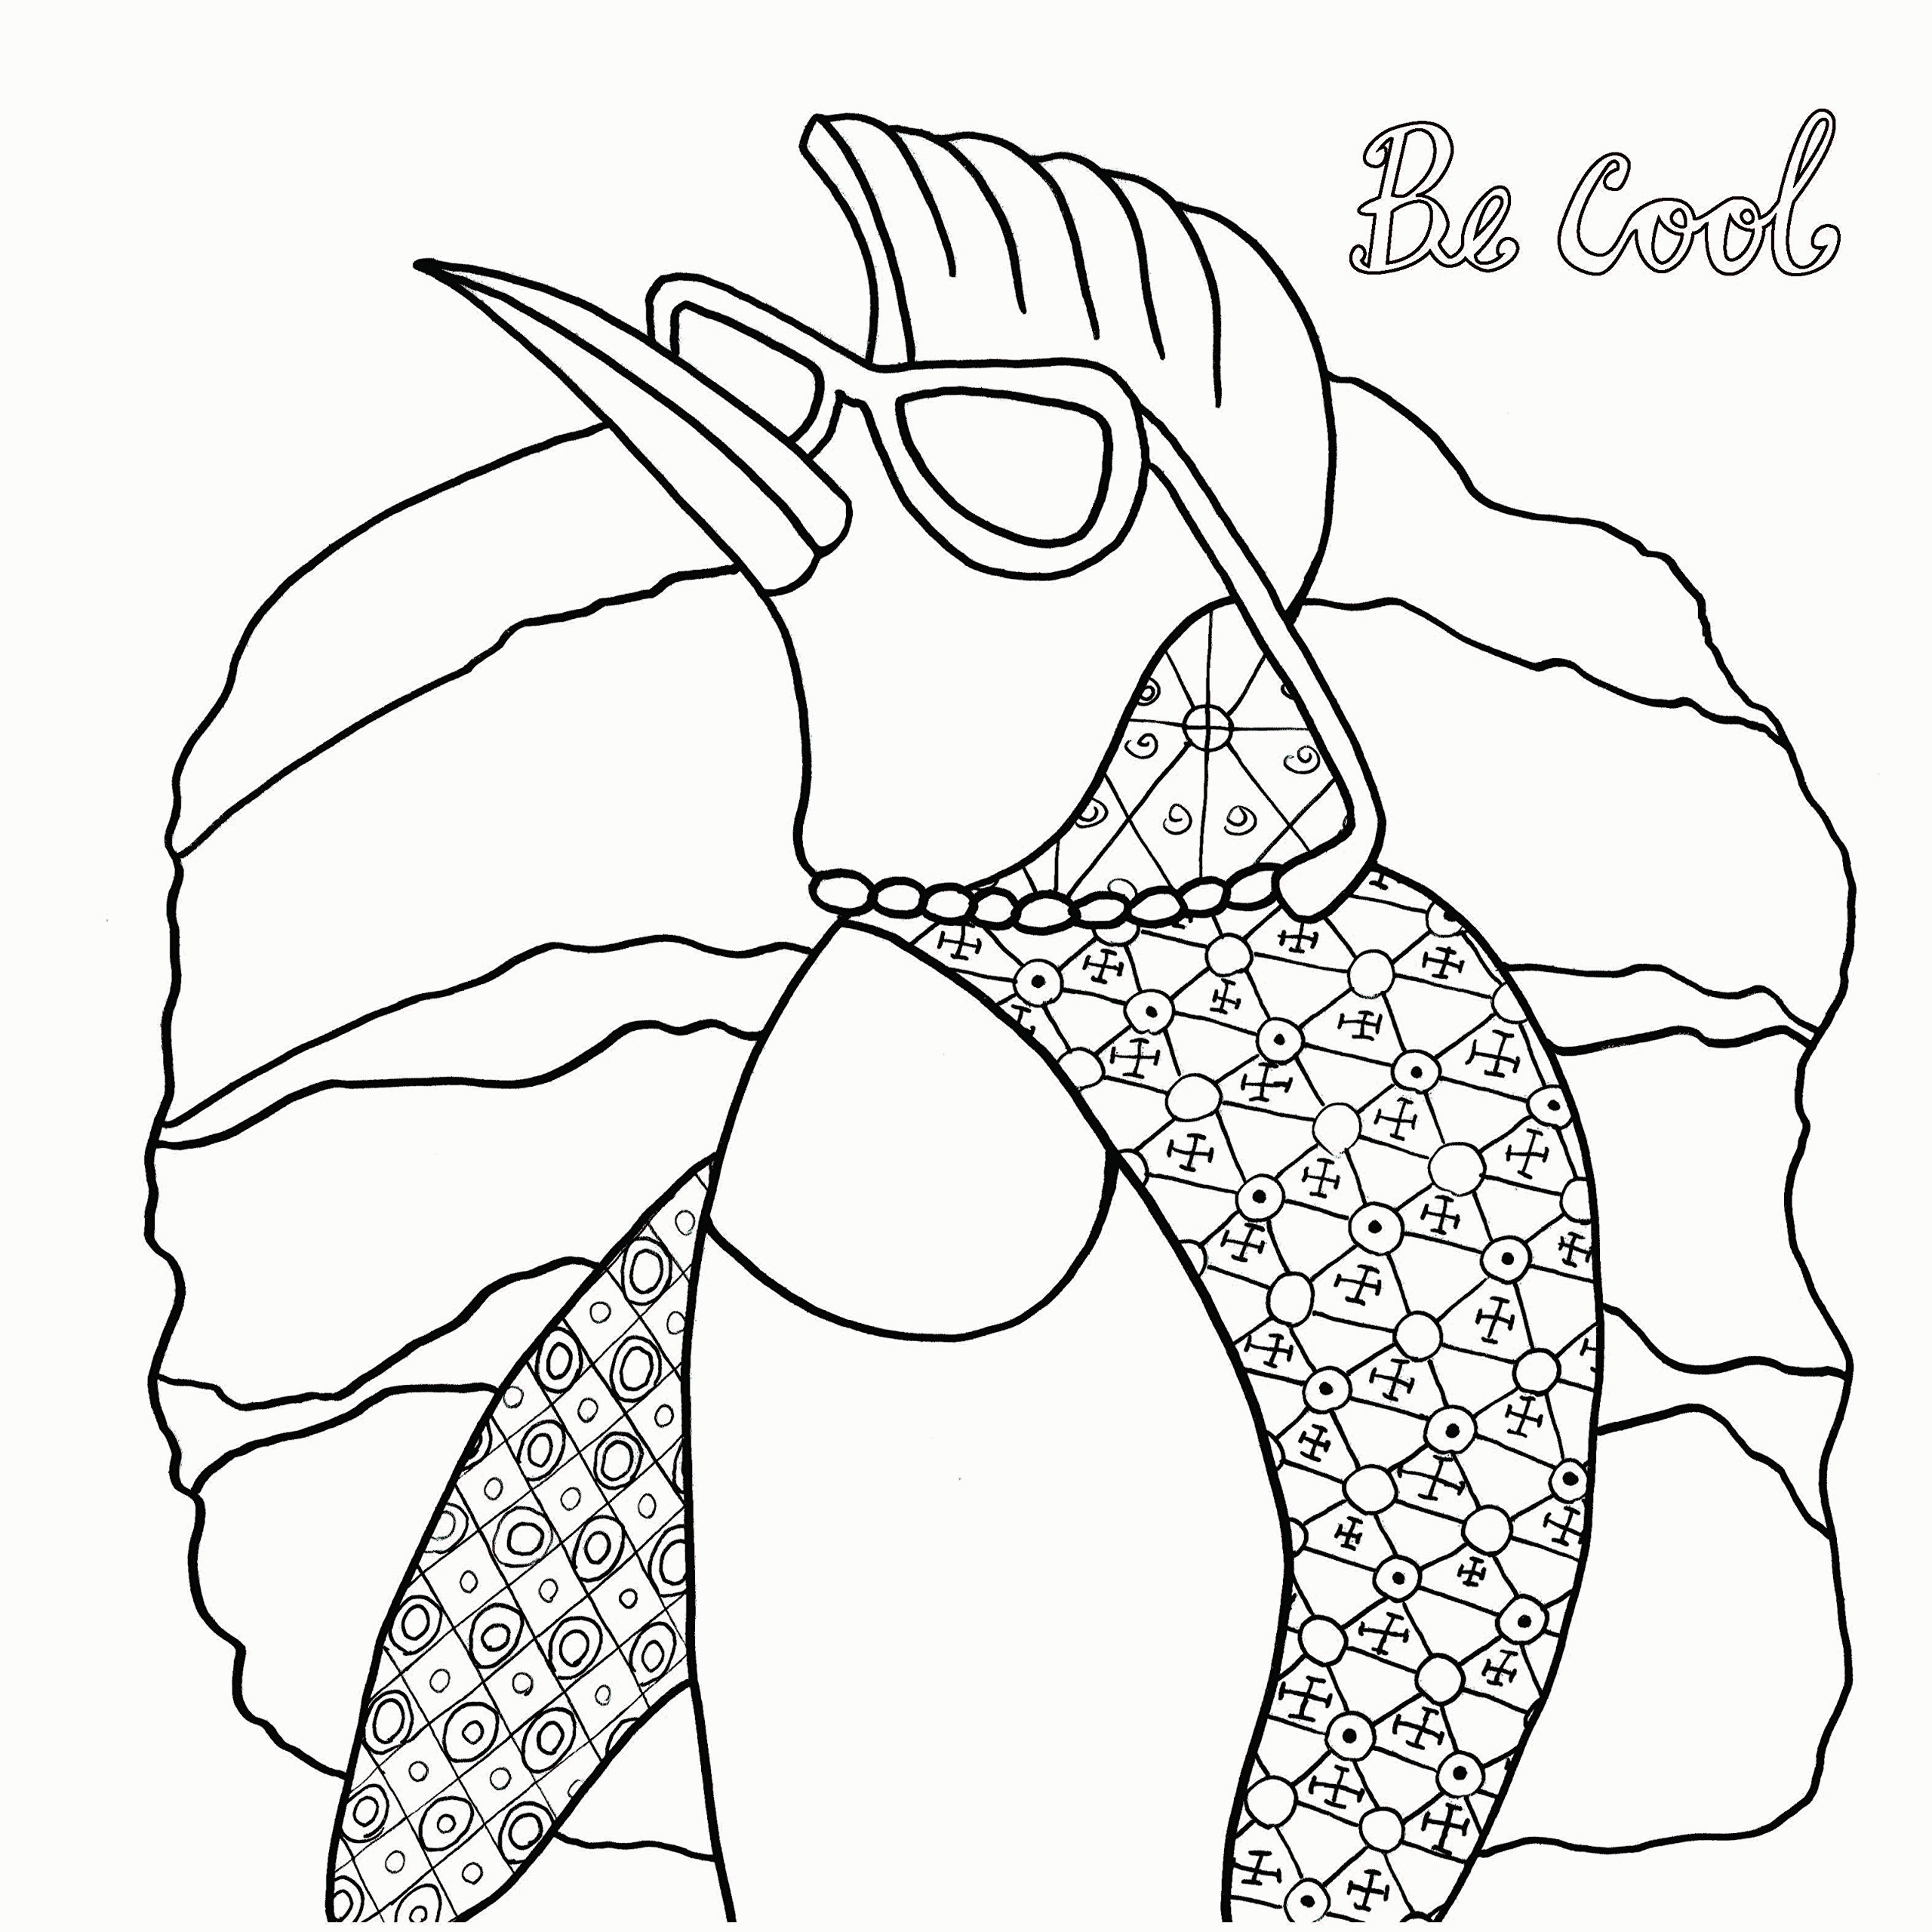 Printable Stoner Coloring Pages
 Stoner Coloring Pages Coloring Home